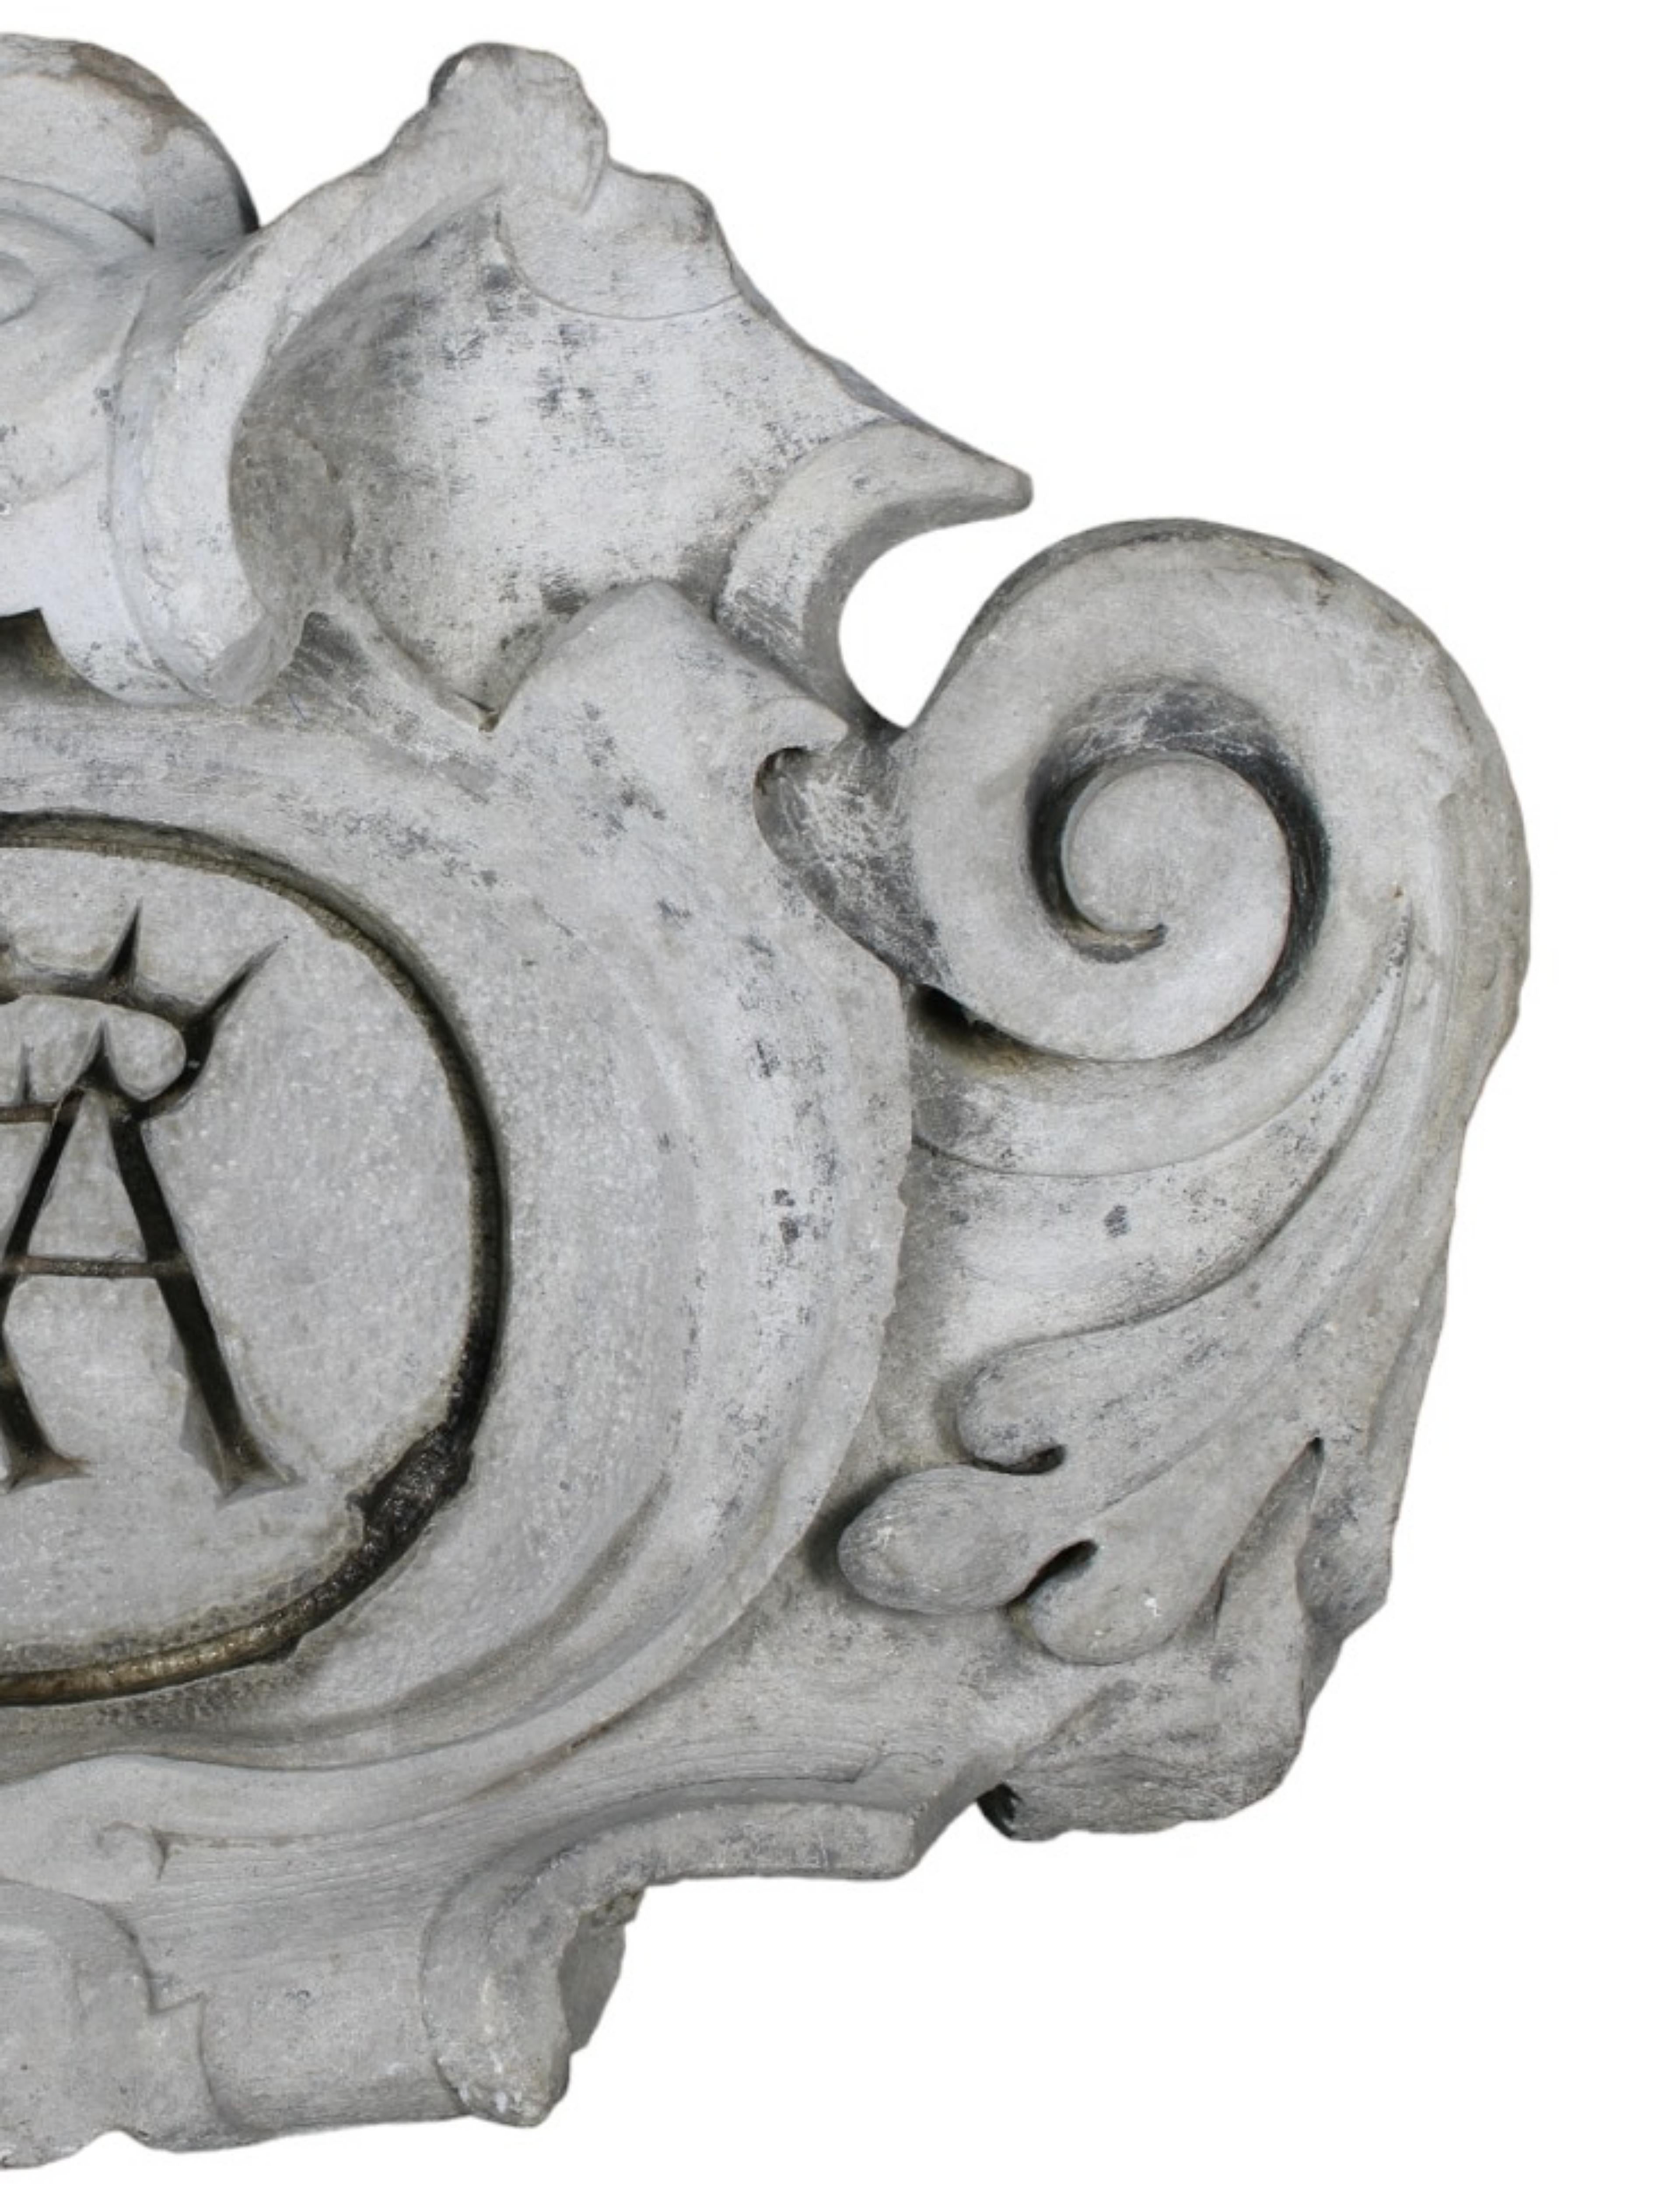 RENAISSANCE COAT OF ARMS in White Carrara Marble Italy 17th Century
finely carved with roccaille inside reserve crowned heraldic coat of arms 
Italy 17th century
h 80 x 55 x 20 cm
some defects of the age